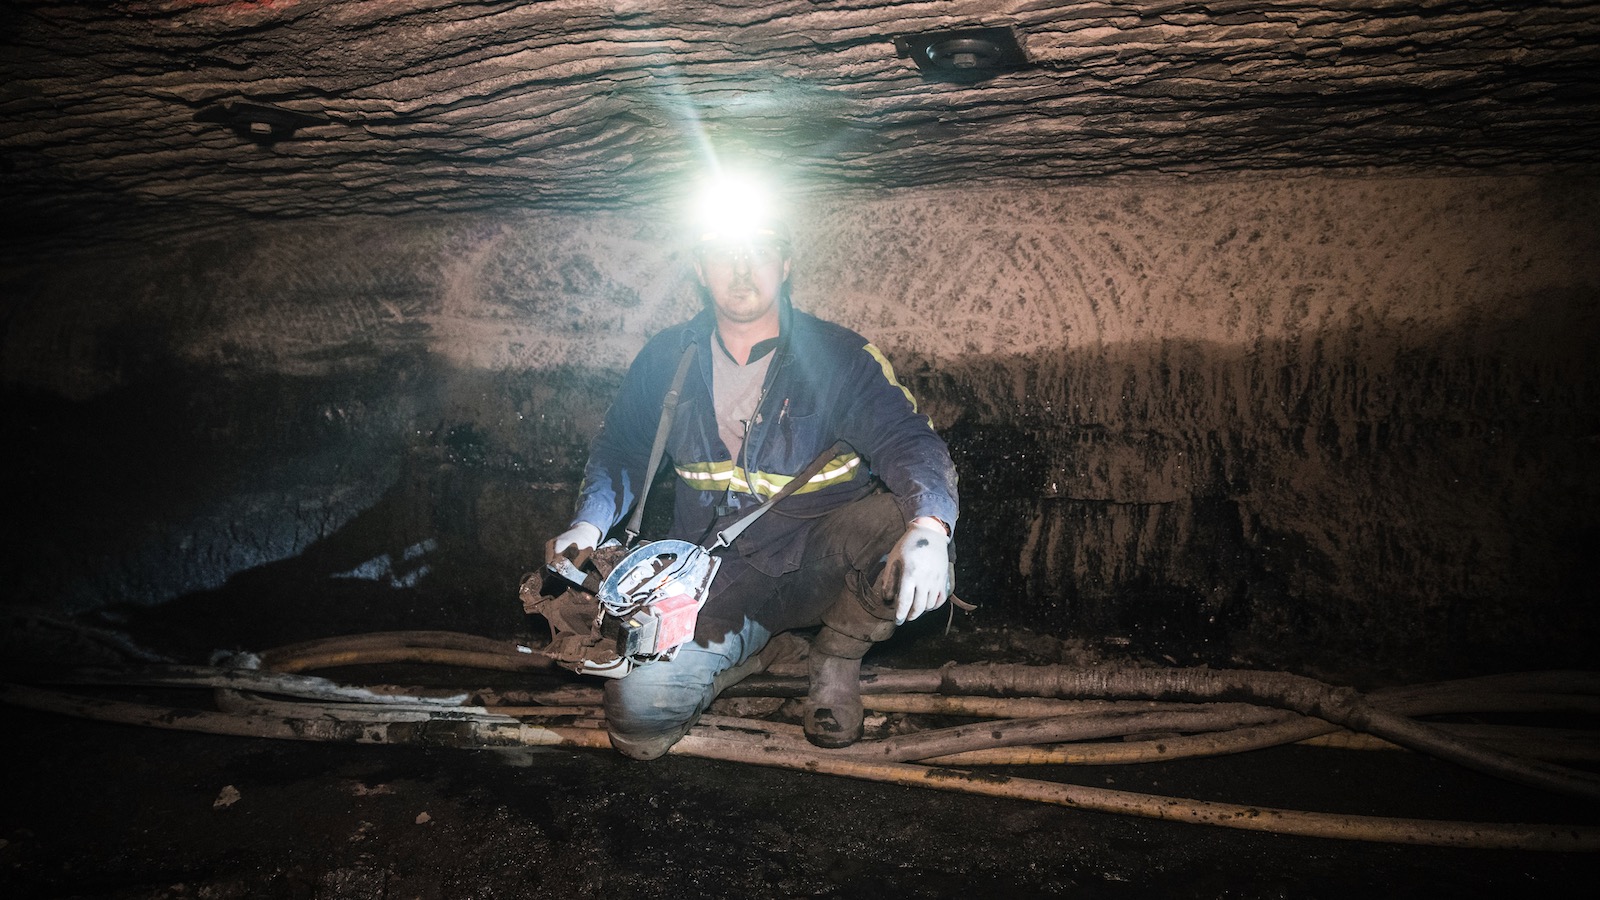 A coal miner in blue coveralls and a headlamp looks directly at the camera while crouching in the cramped confines of a mine shaft.